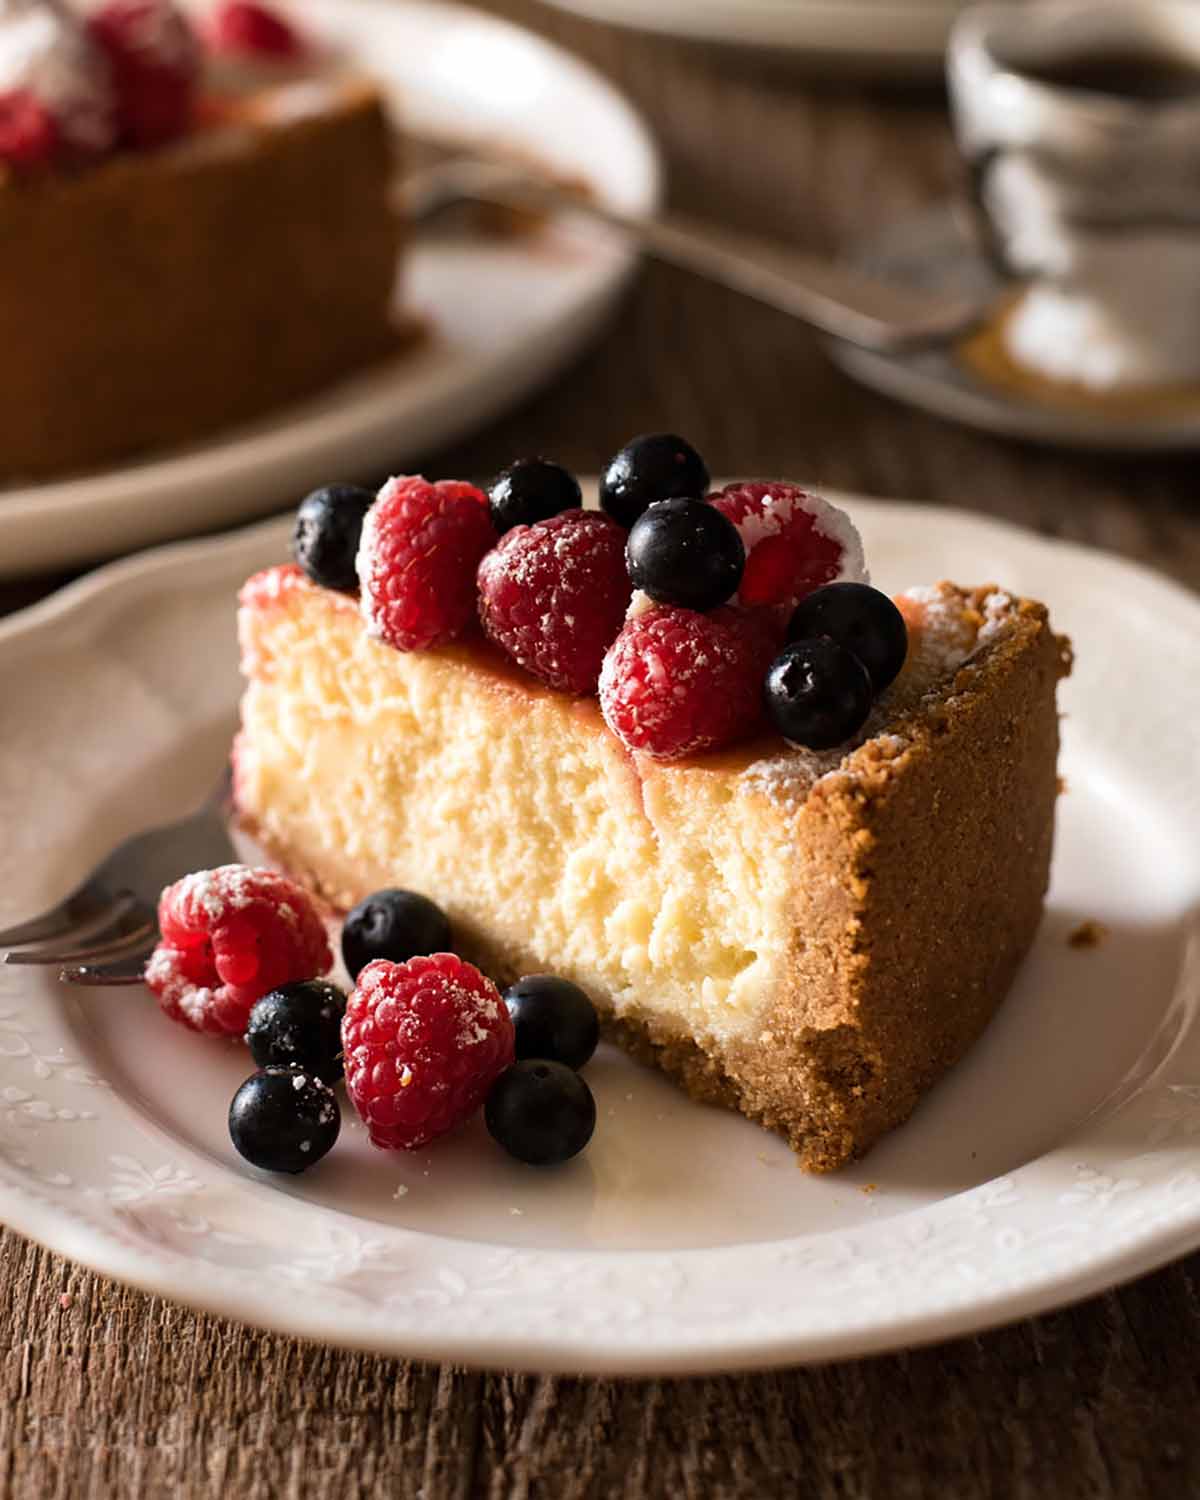 Slice of Classic baked cheesecake